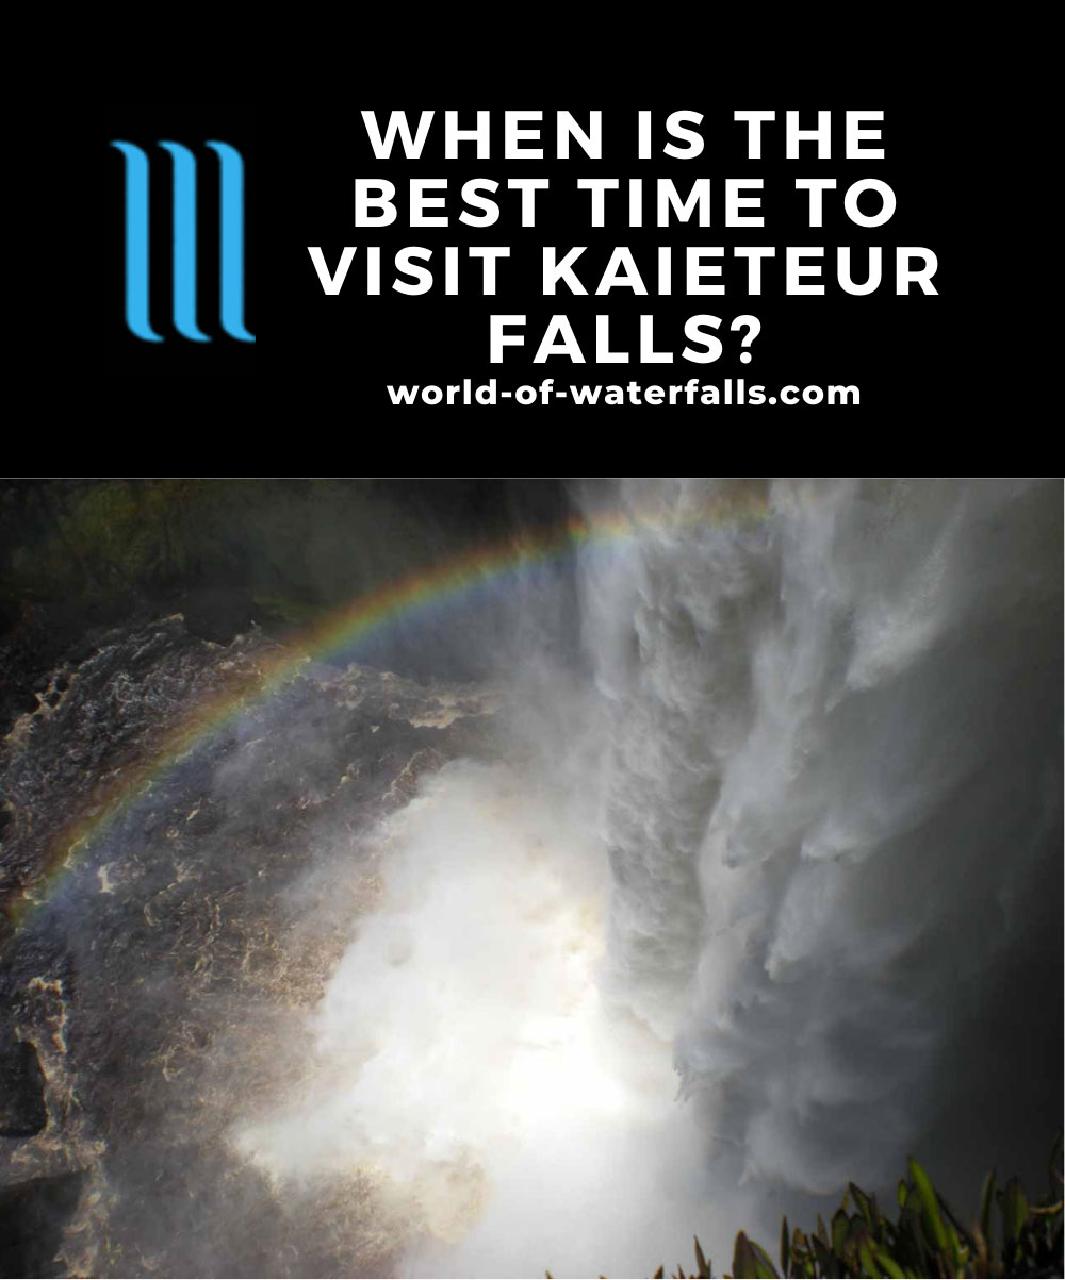 When is the Best Time to Visit Kaieteur Falls?